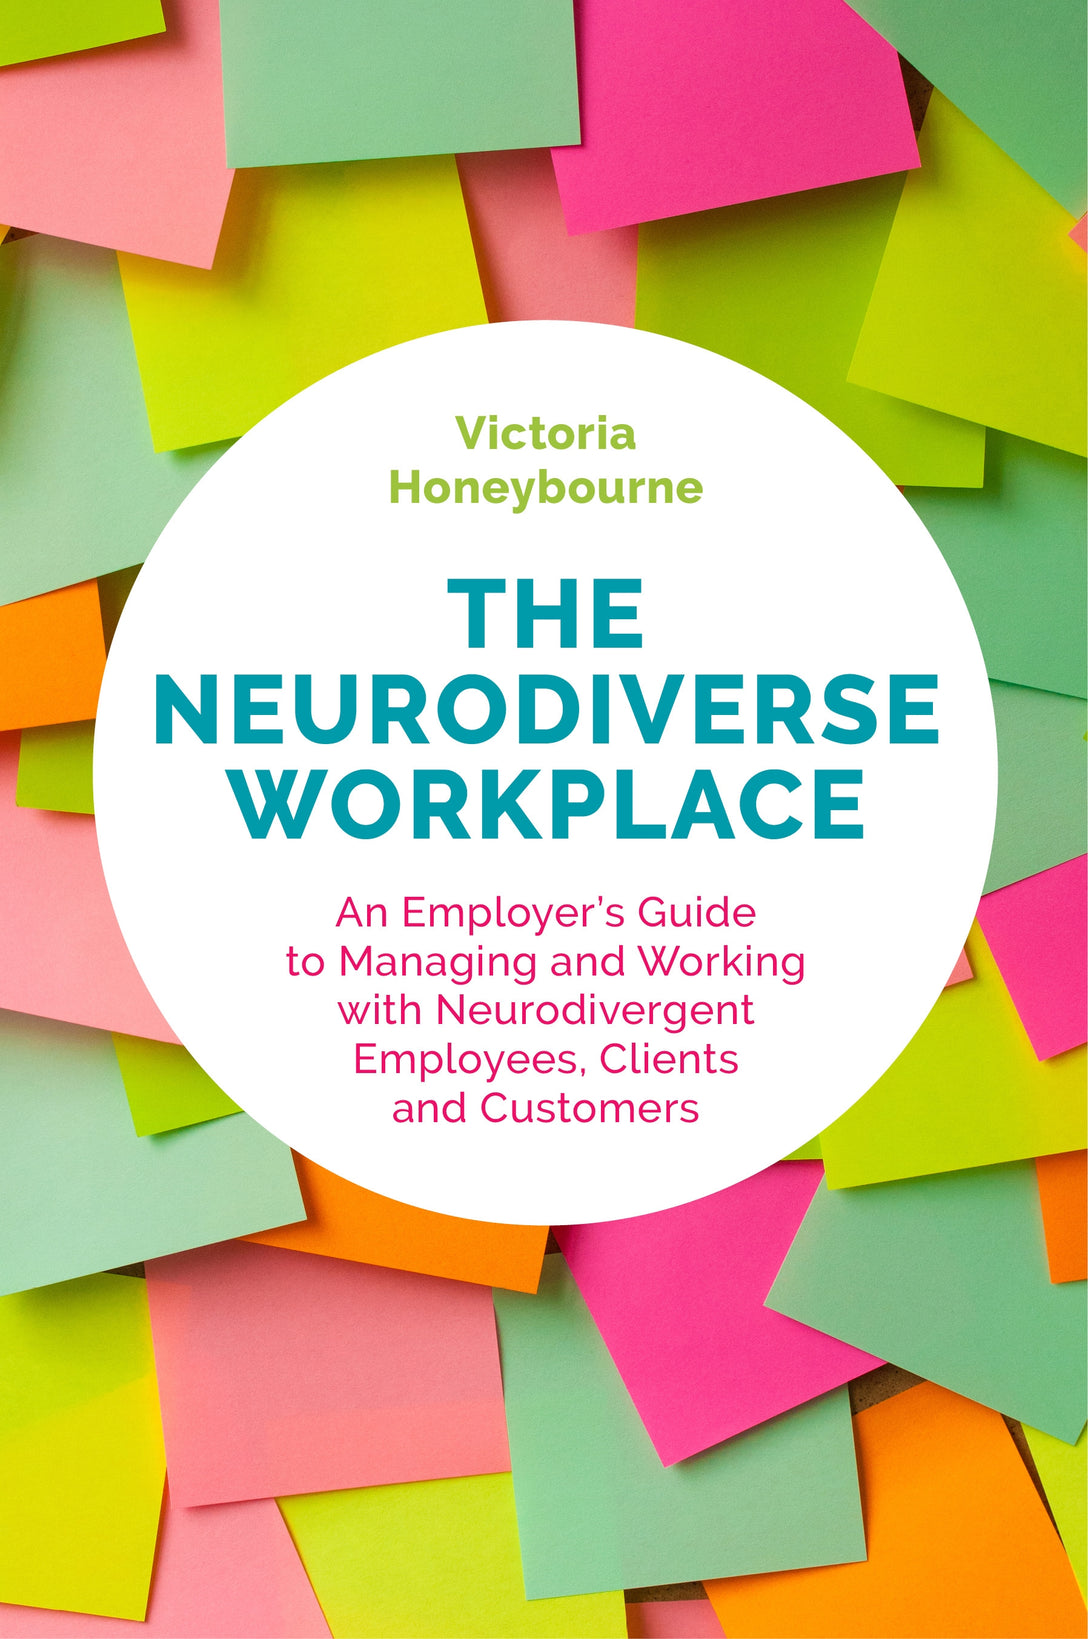 The Neurodiverse Workplace by Victoria Honeybourne